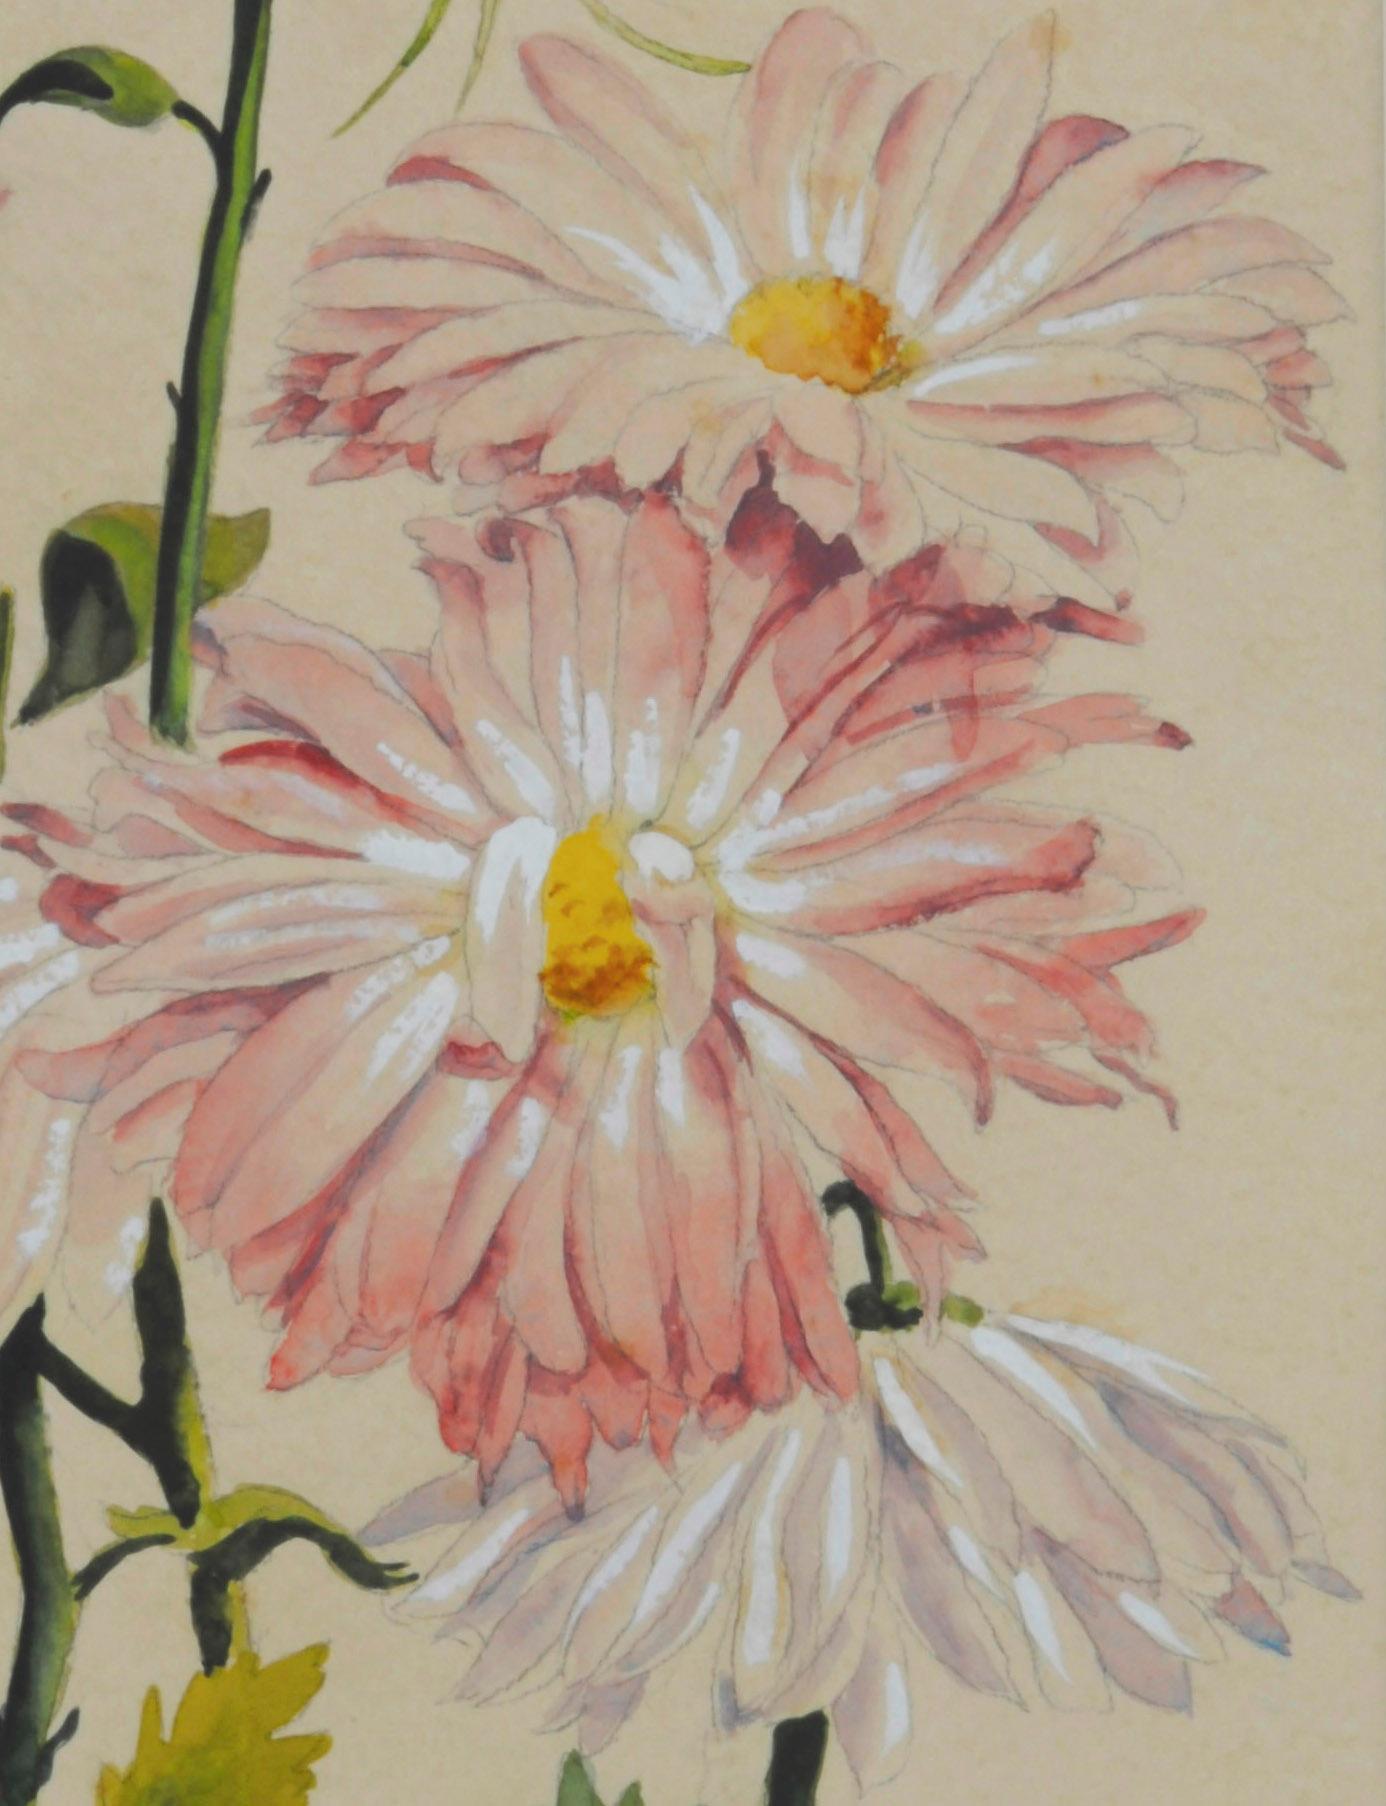 Chrysanthemums and Tiger Lilies
Signed and dated lower left (twice), see photo
Watercolor on paper, 1935
A symbol of the sun, the Japanese consider the orderly unfolding of the chrysanthemum's petals to represent perfection. Confucius once suggested